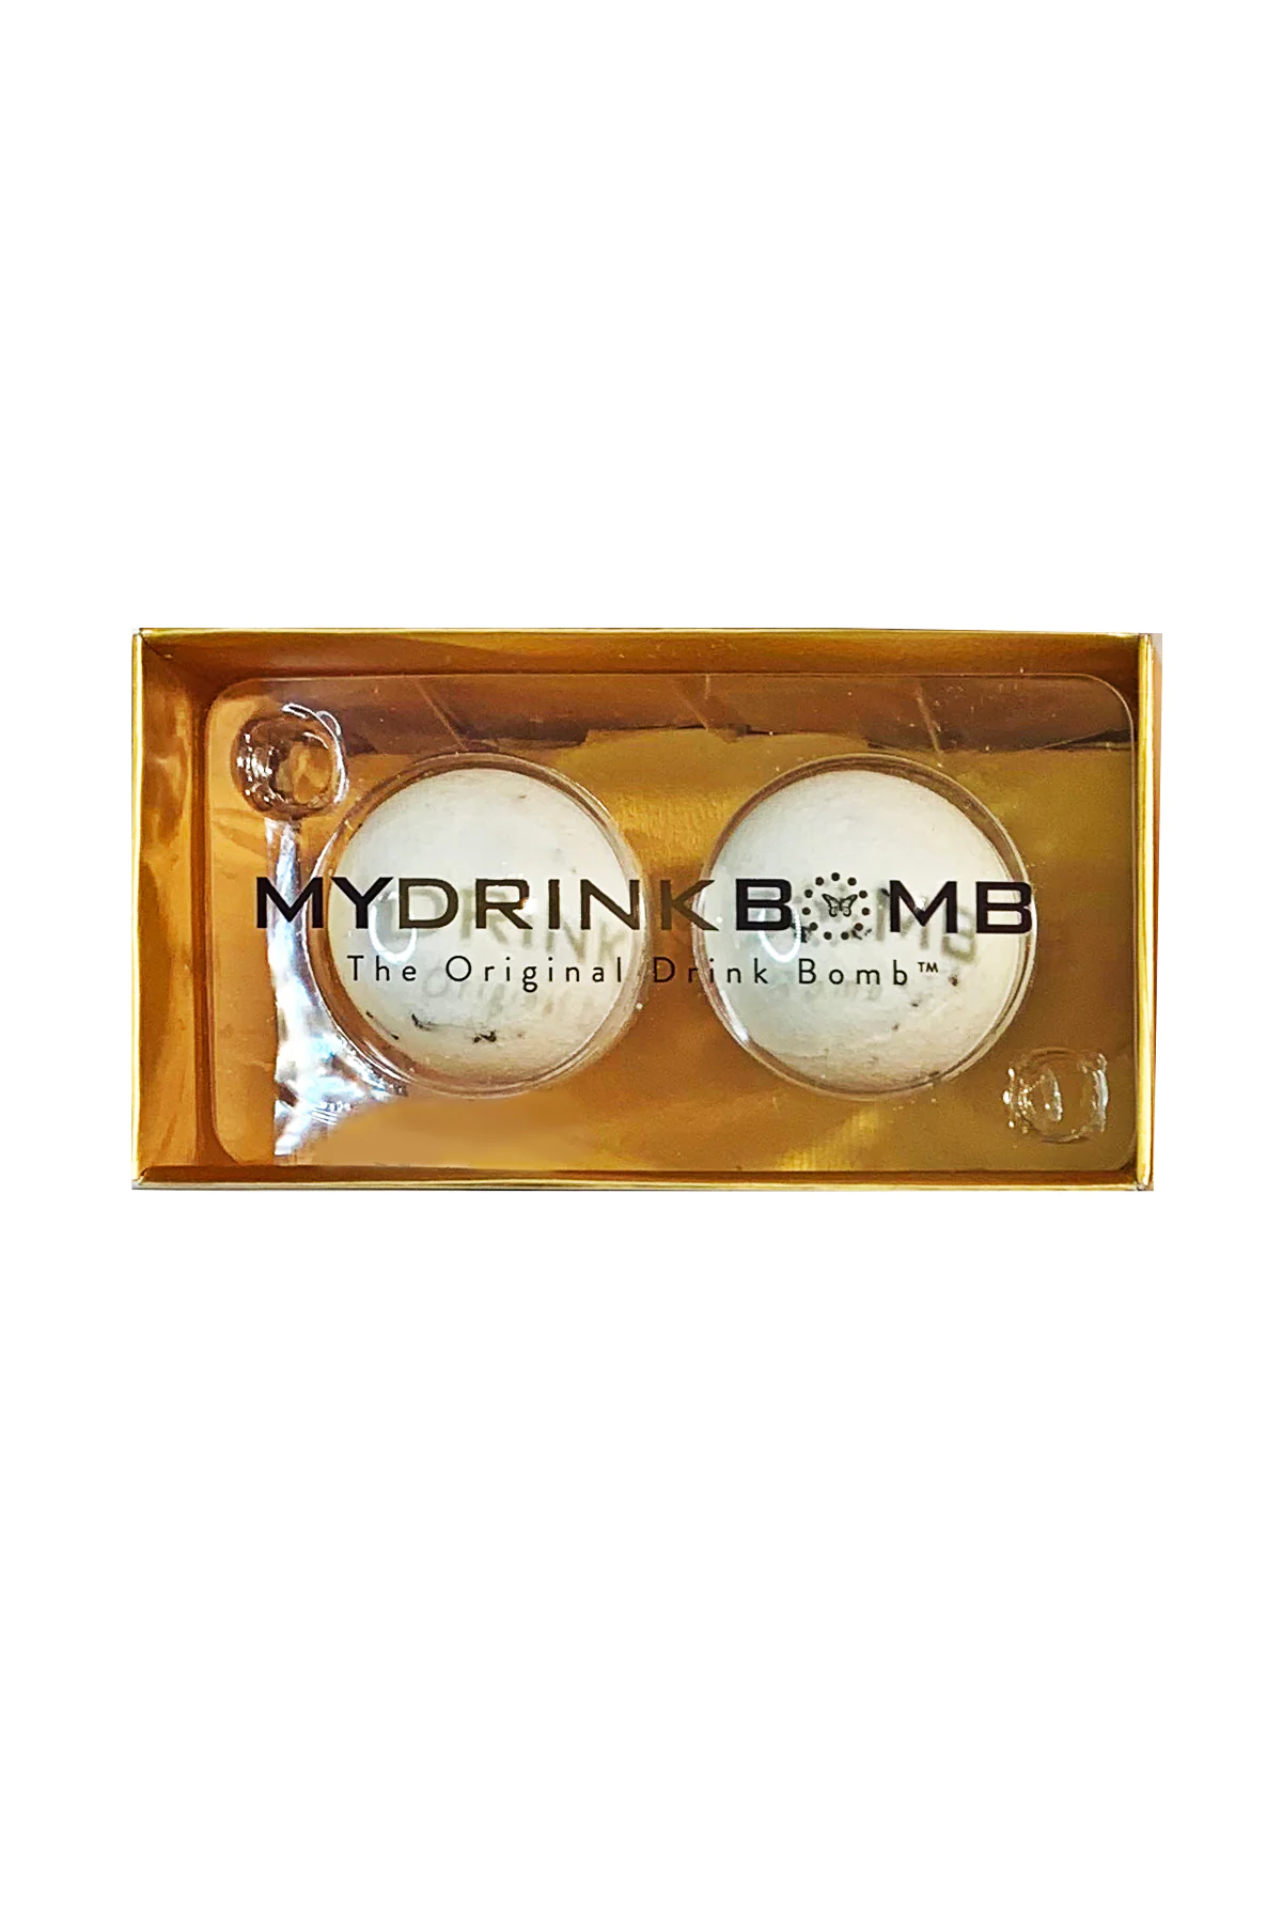 Cocktail Drink Bomb - 2 Pack